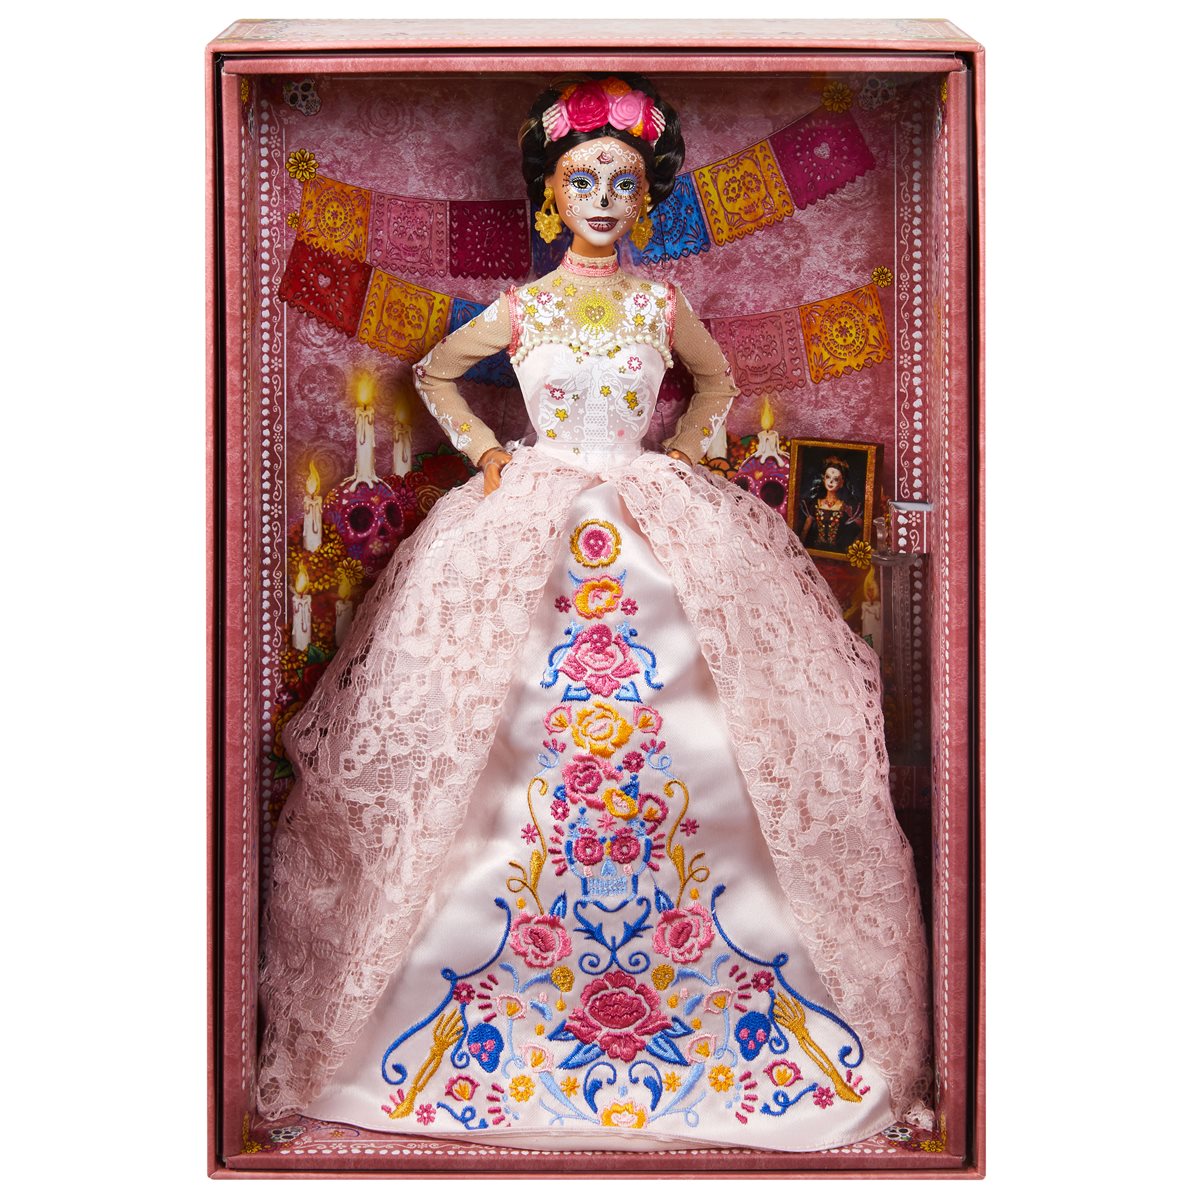 day of the dead barbie doll pre order